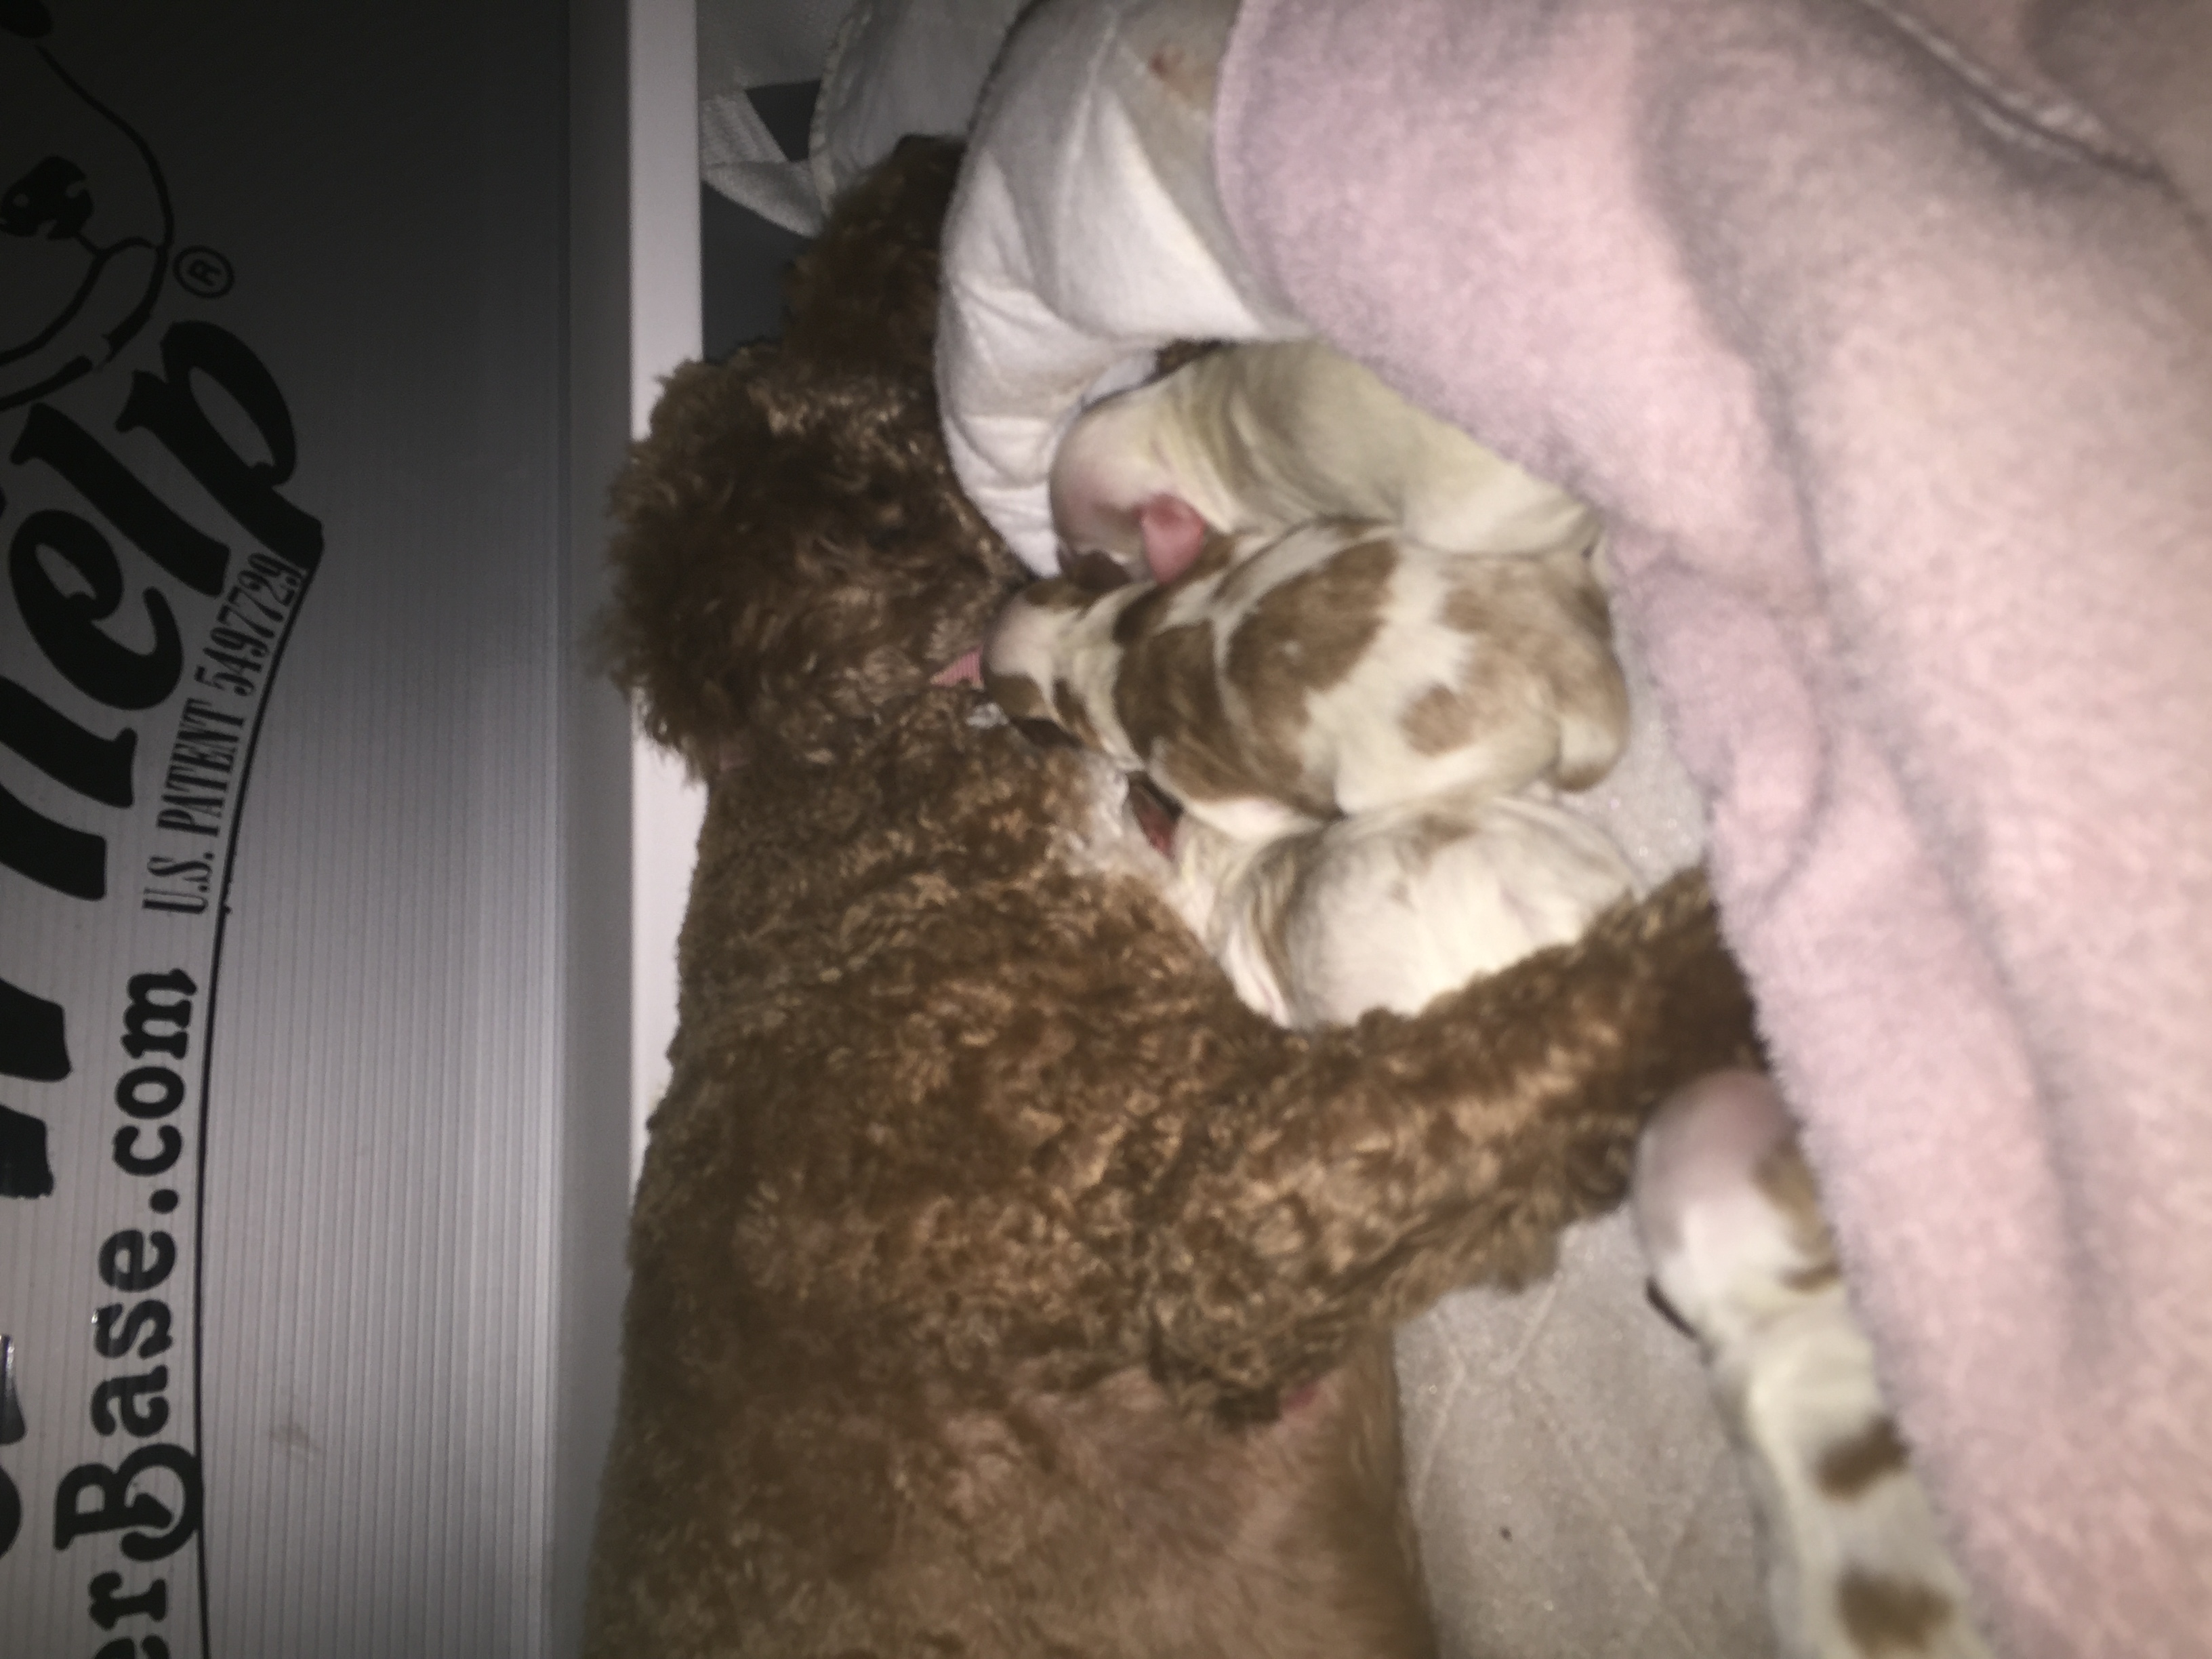 Piper snuggling with babies